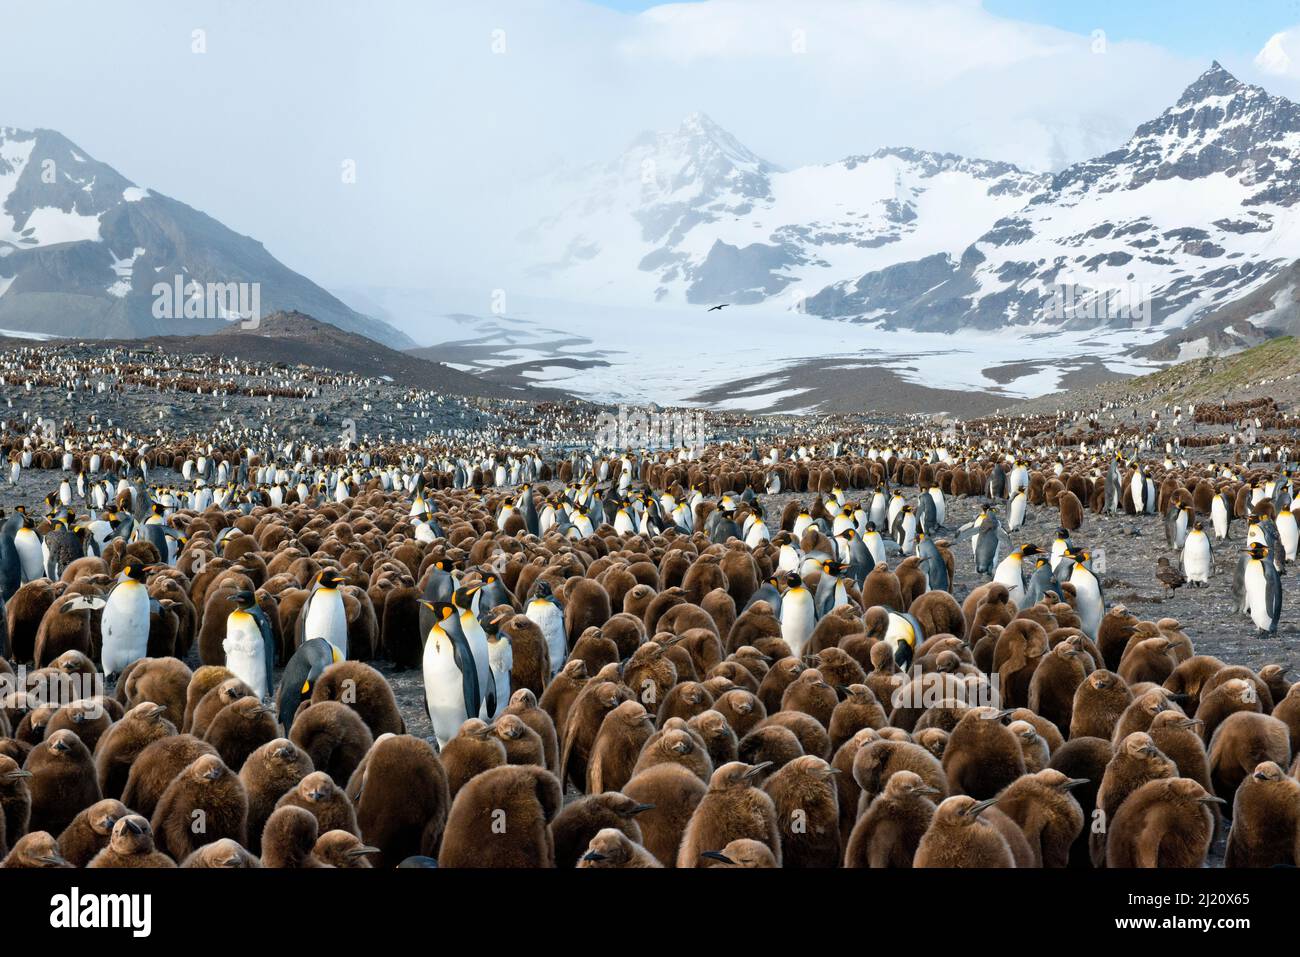 King penguin (Aptenodytes patagonicus) colony with a population of 200,000 birds at St. Andrews Bay, South Georgia Island, Antarctica. Stock Photo